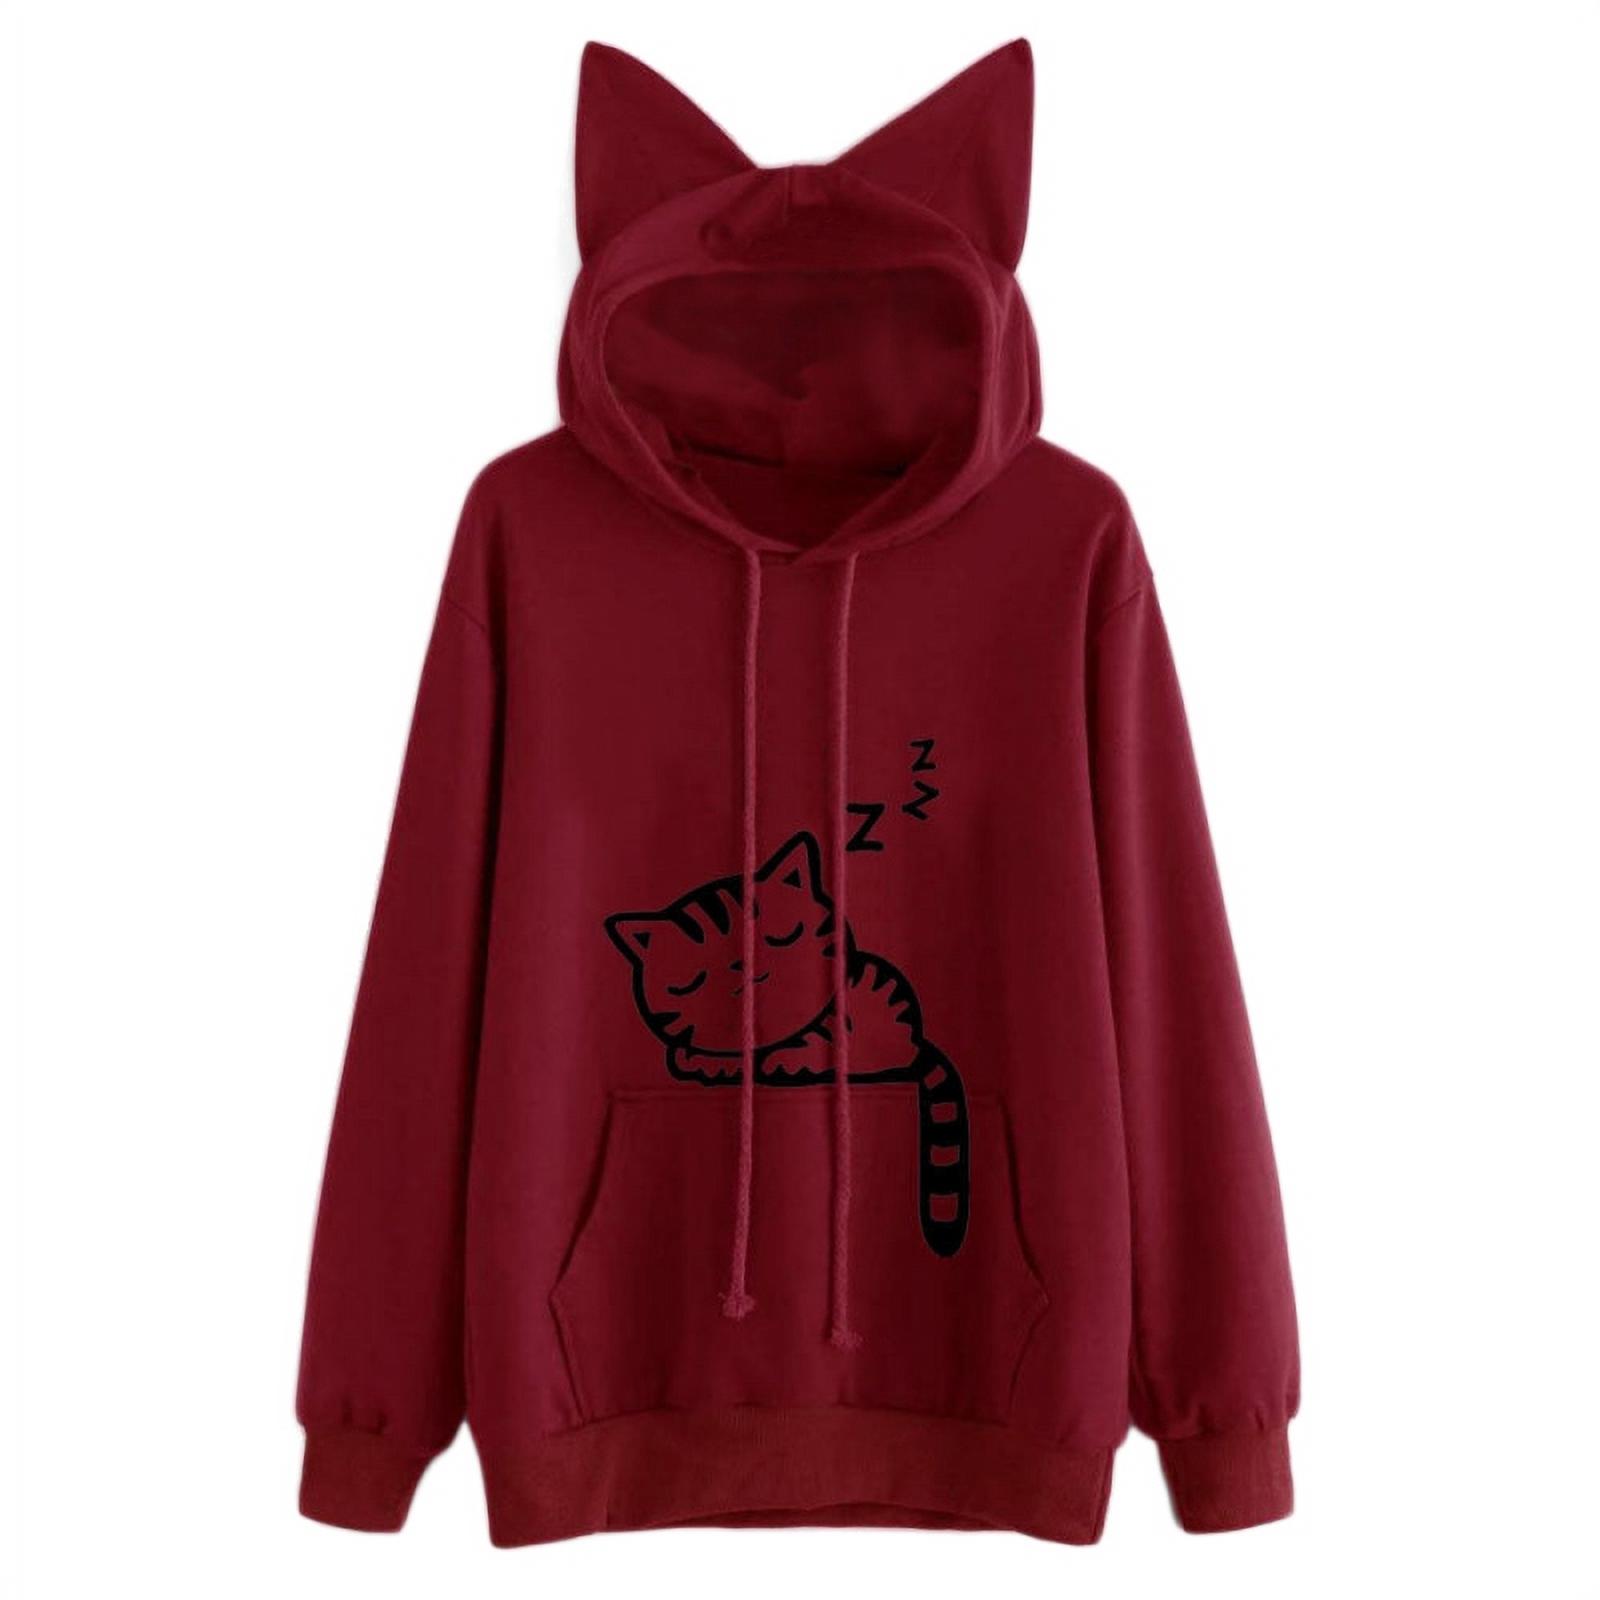 Women's casual jacket, autumn cute cat print with hat sweater jacket casual jacket - image 2 of 3